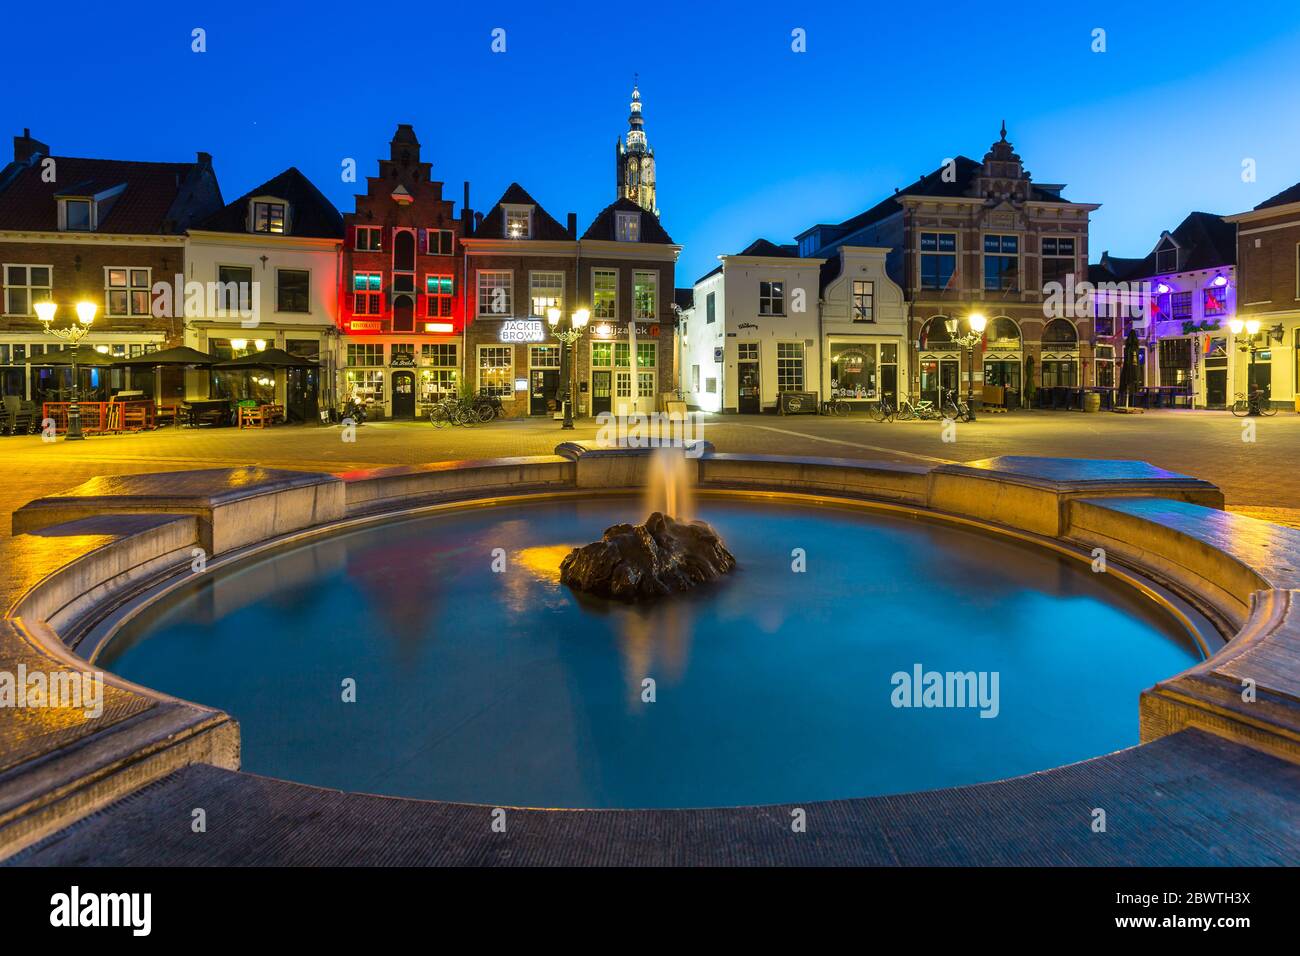 AMERSFOORT, The Netherlands - April 5 , 2020 - The Hof is the busiest square in Amersfoort where people have a drink but during this evening it was re Stock Photo